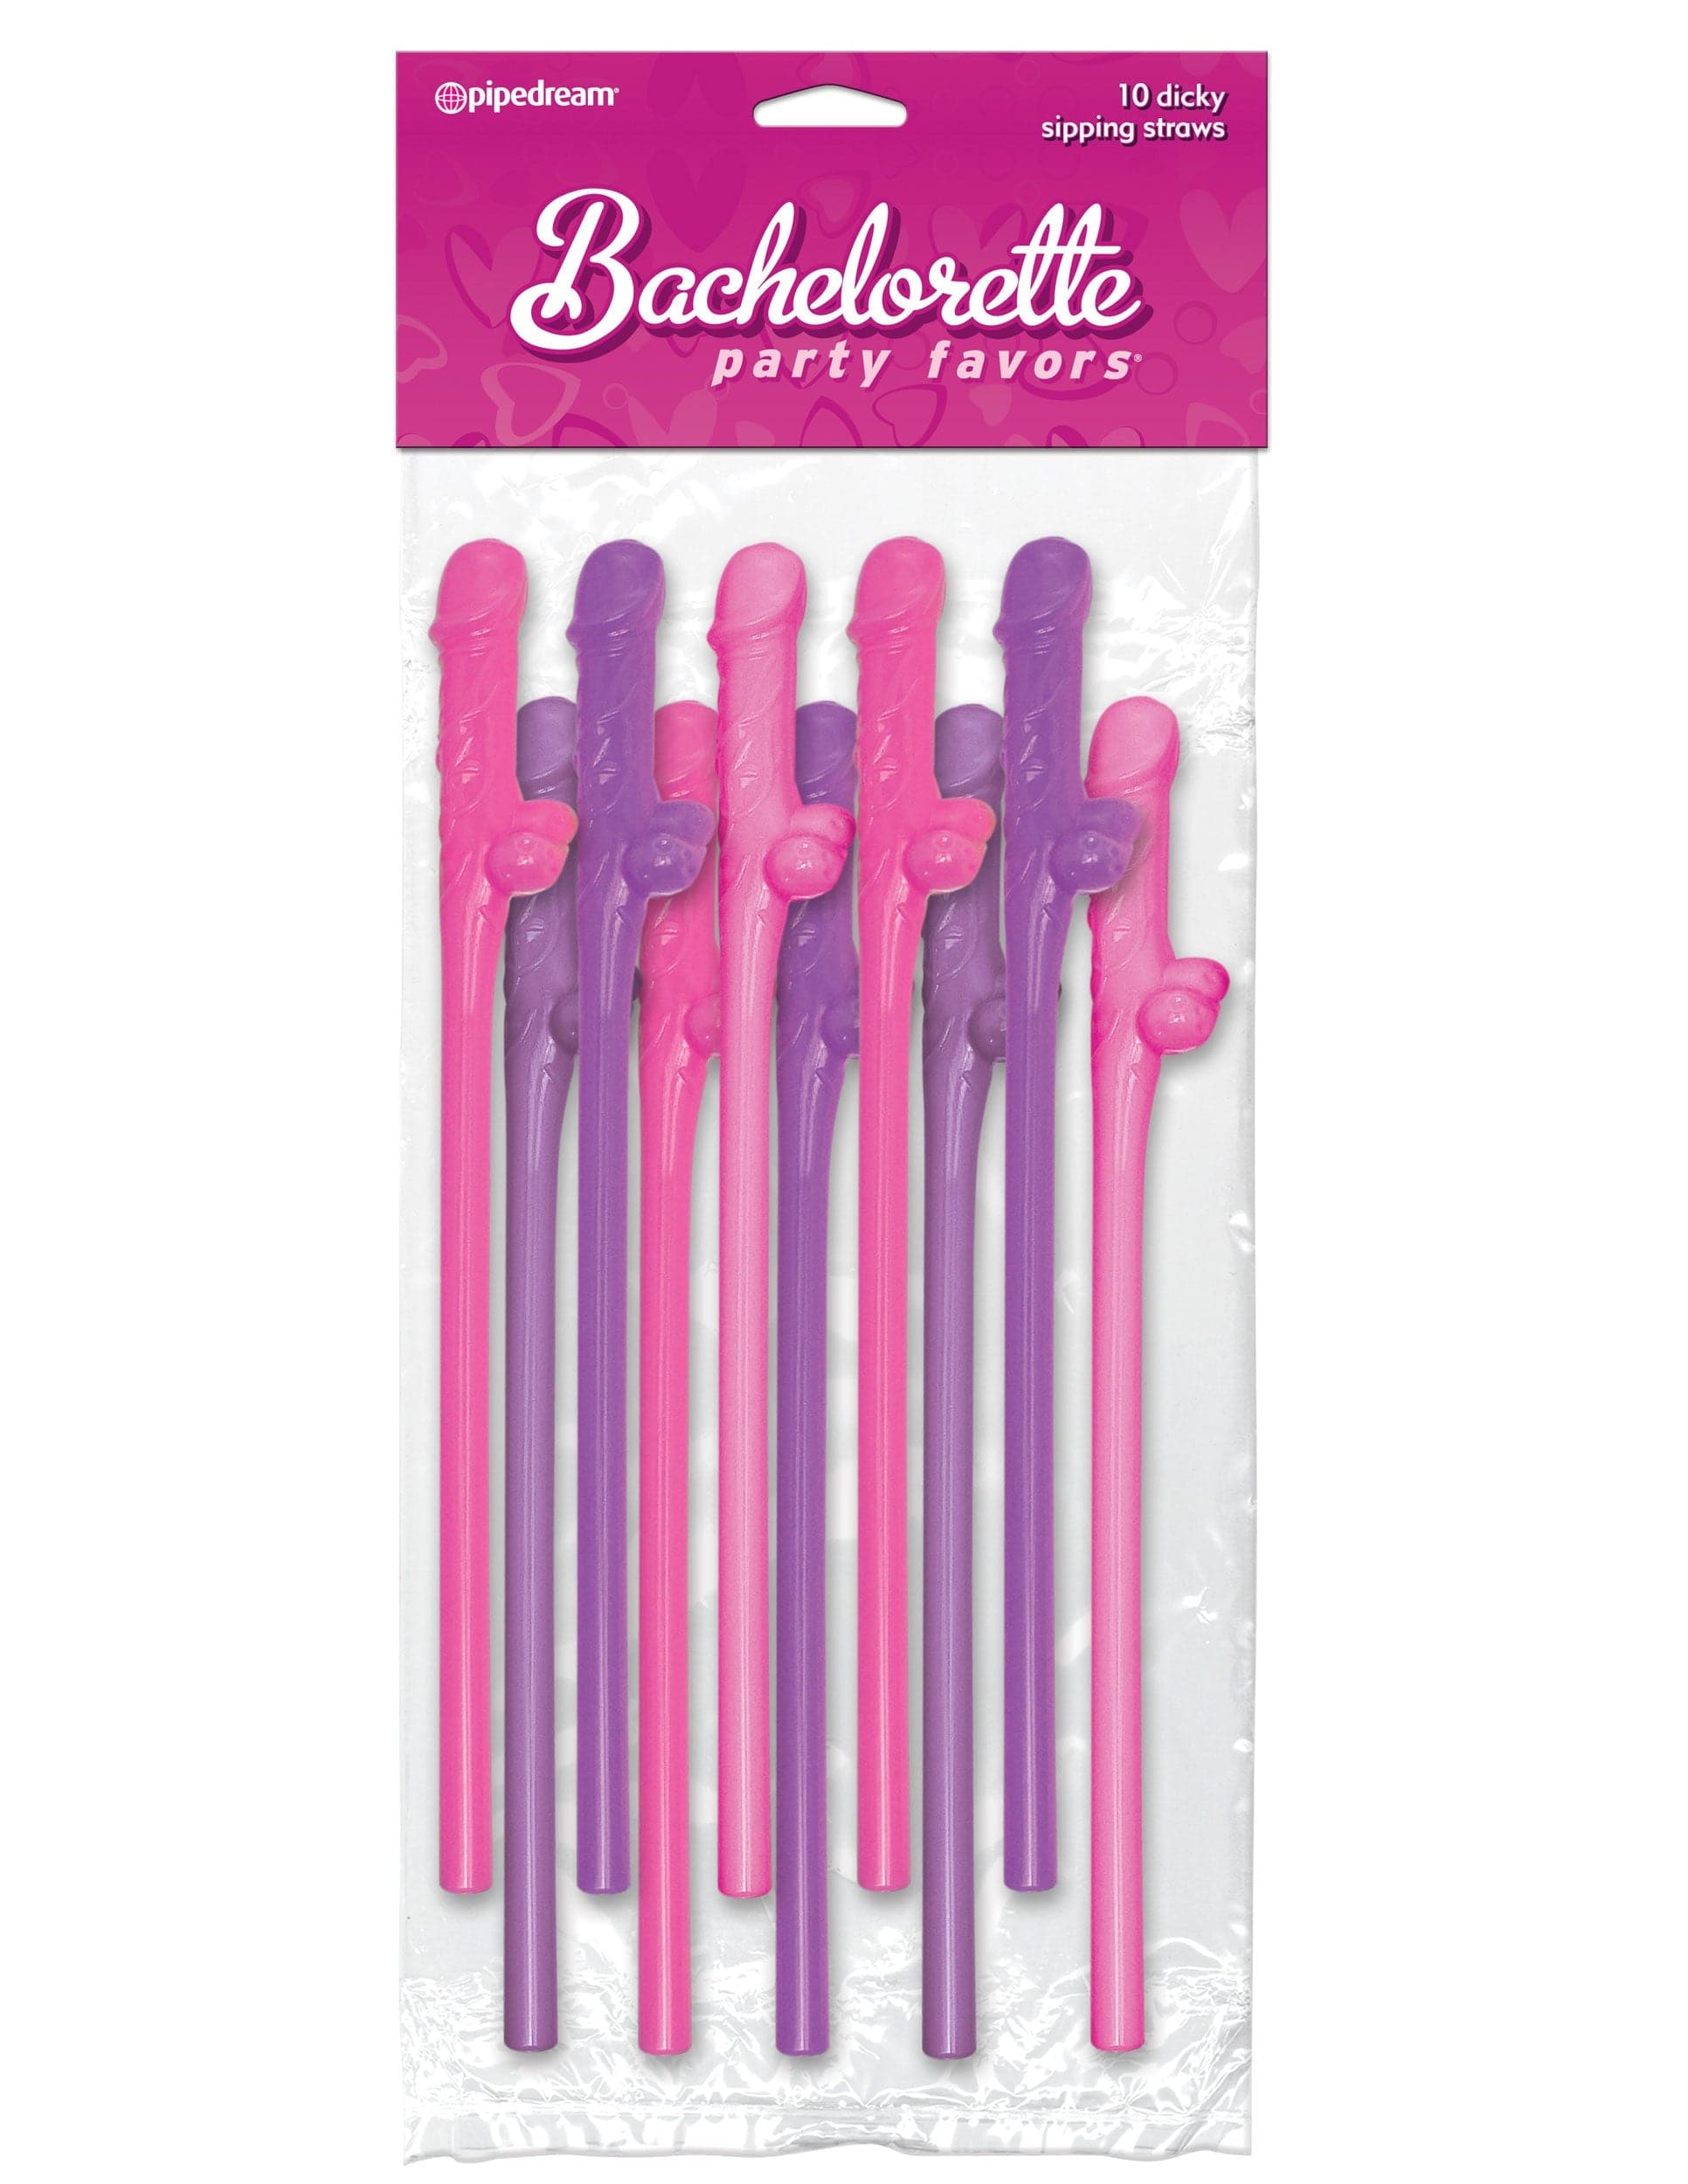 DICKY SIPPING STRAWS - PINK/PURPLE NEON